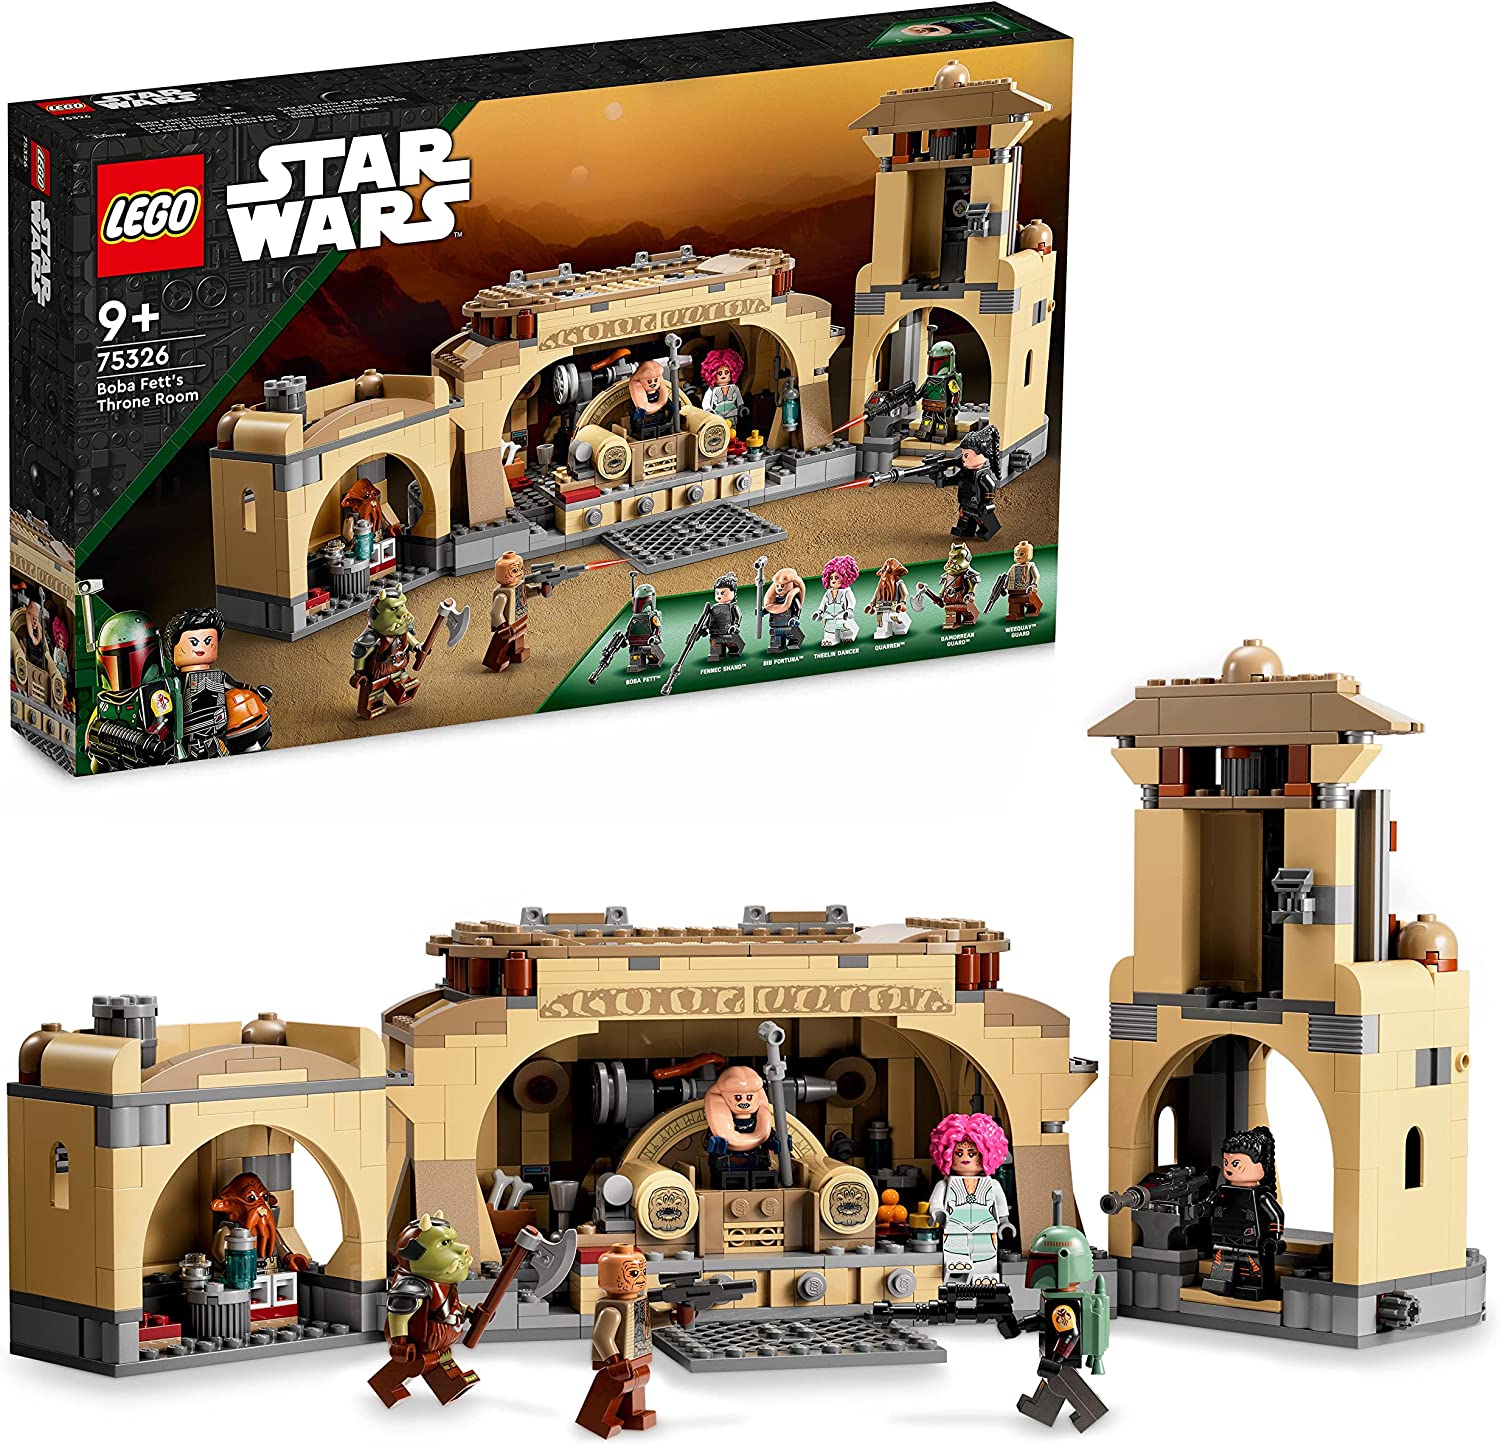 LEGO 75326 Star Wars Boba Fetts Throne Room Toy for Building with Palaces of Jabba and 7 Mini Figures, from 9 Years